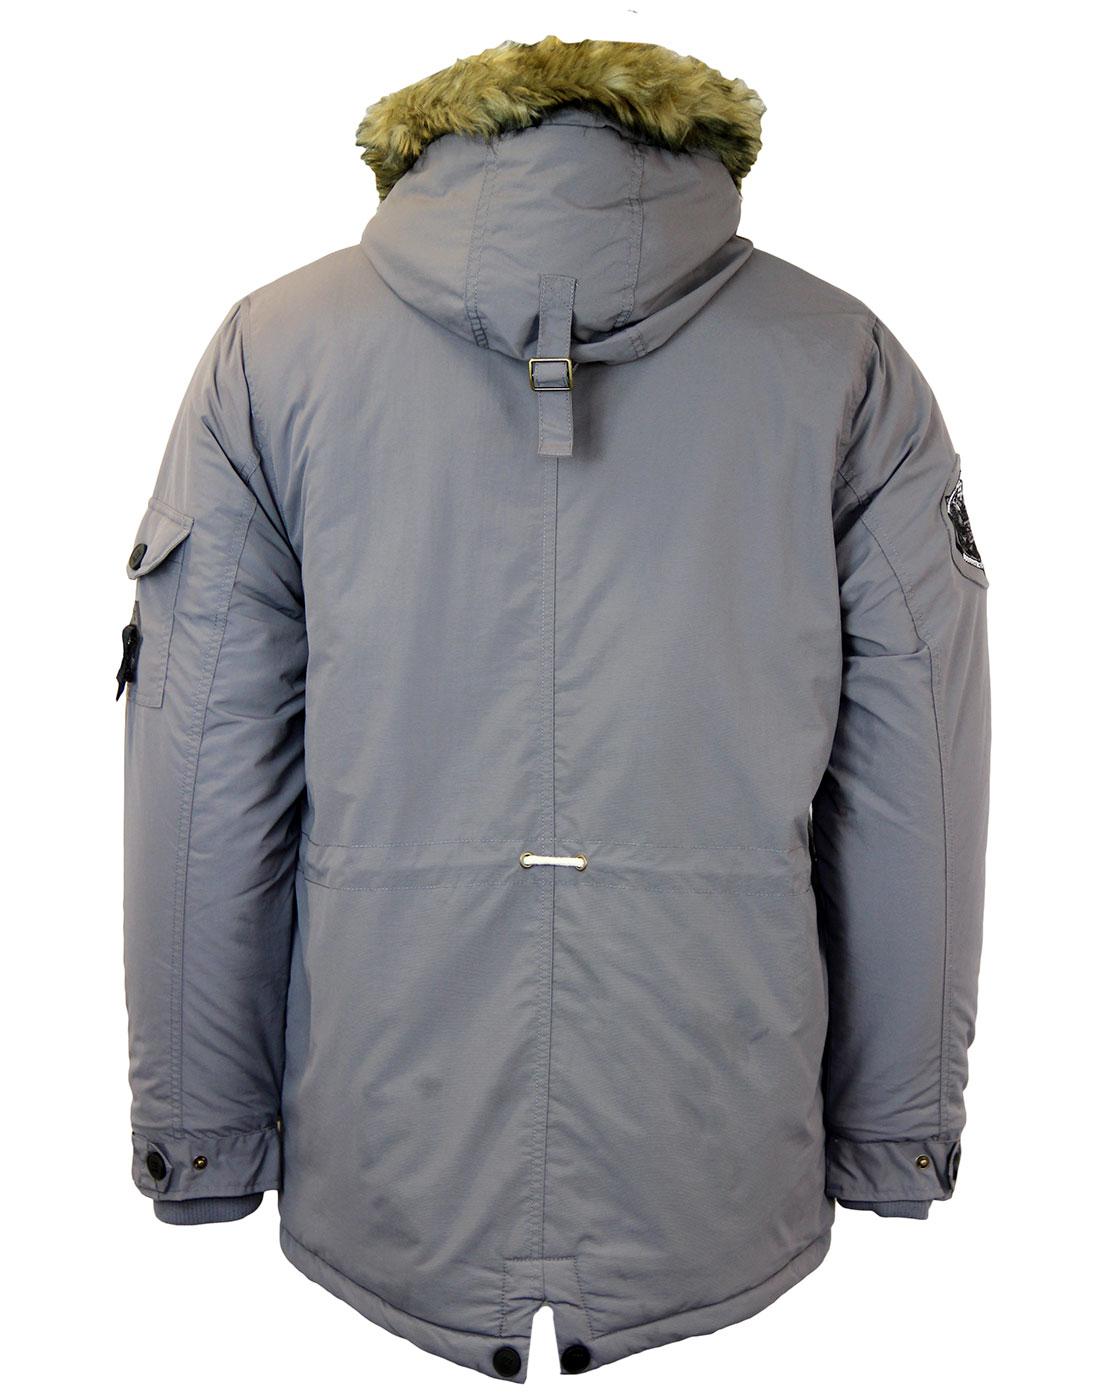 FLY53 Excalibur Mod Fishtail Parka Jacket in Grey